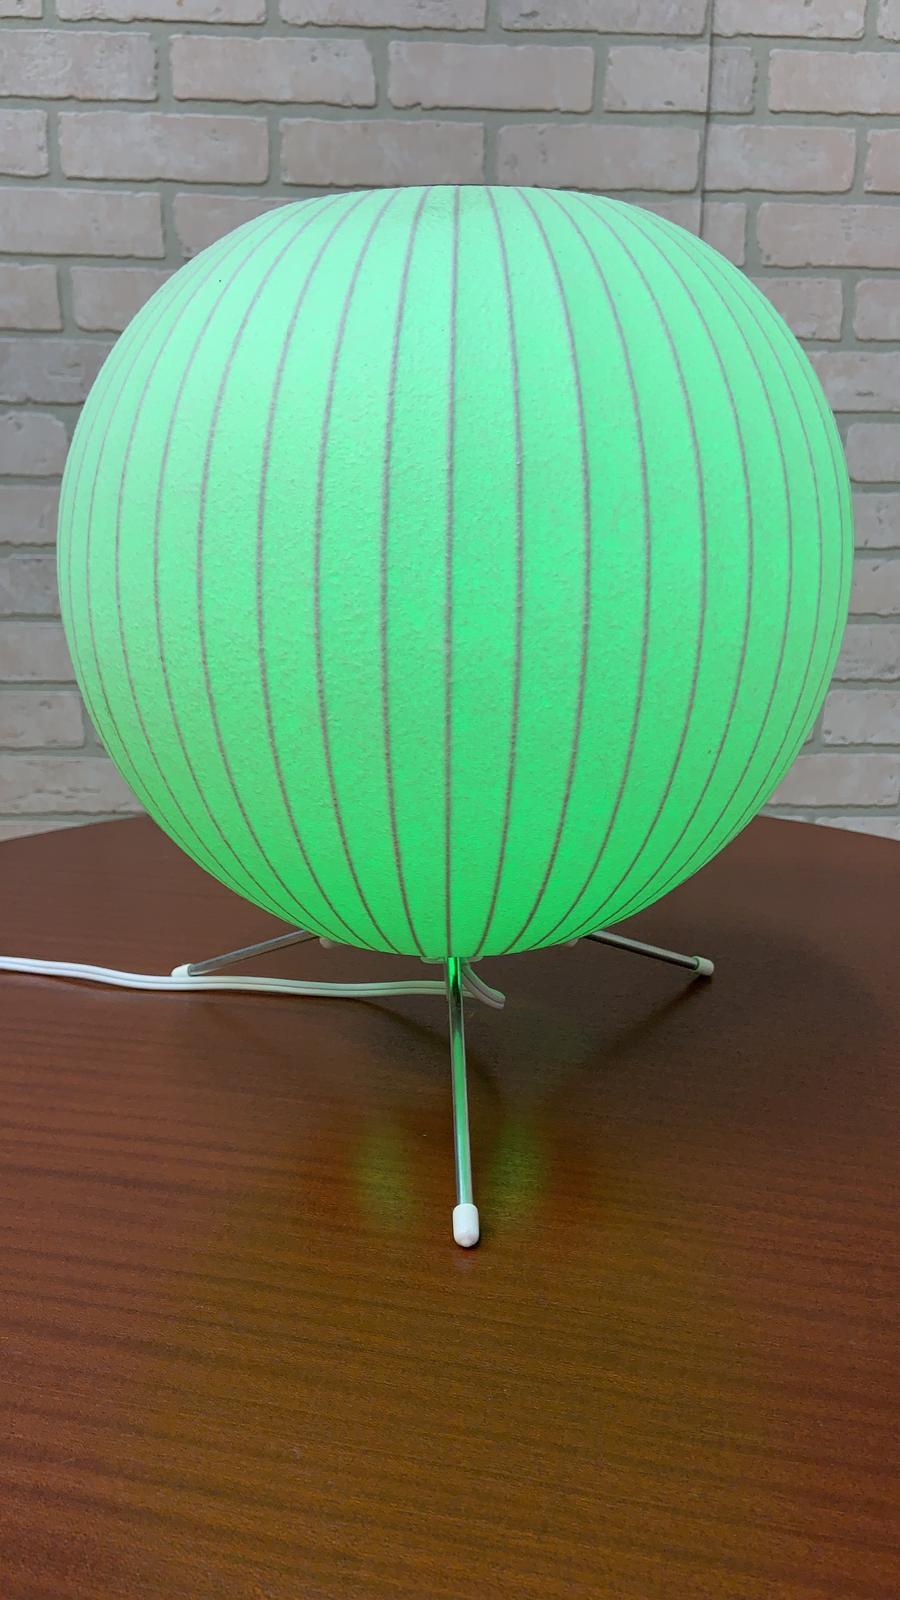 Vintage Mid Century Modern Bubble Lamp Ball with Tripod Stand by George Nelson for Herman Miller 

The MCM George Nelson Bubble Lamp will add a touch of softness and luminosity to you interior. Designed by George Nelson in 1952, this elegant fixture